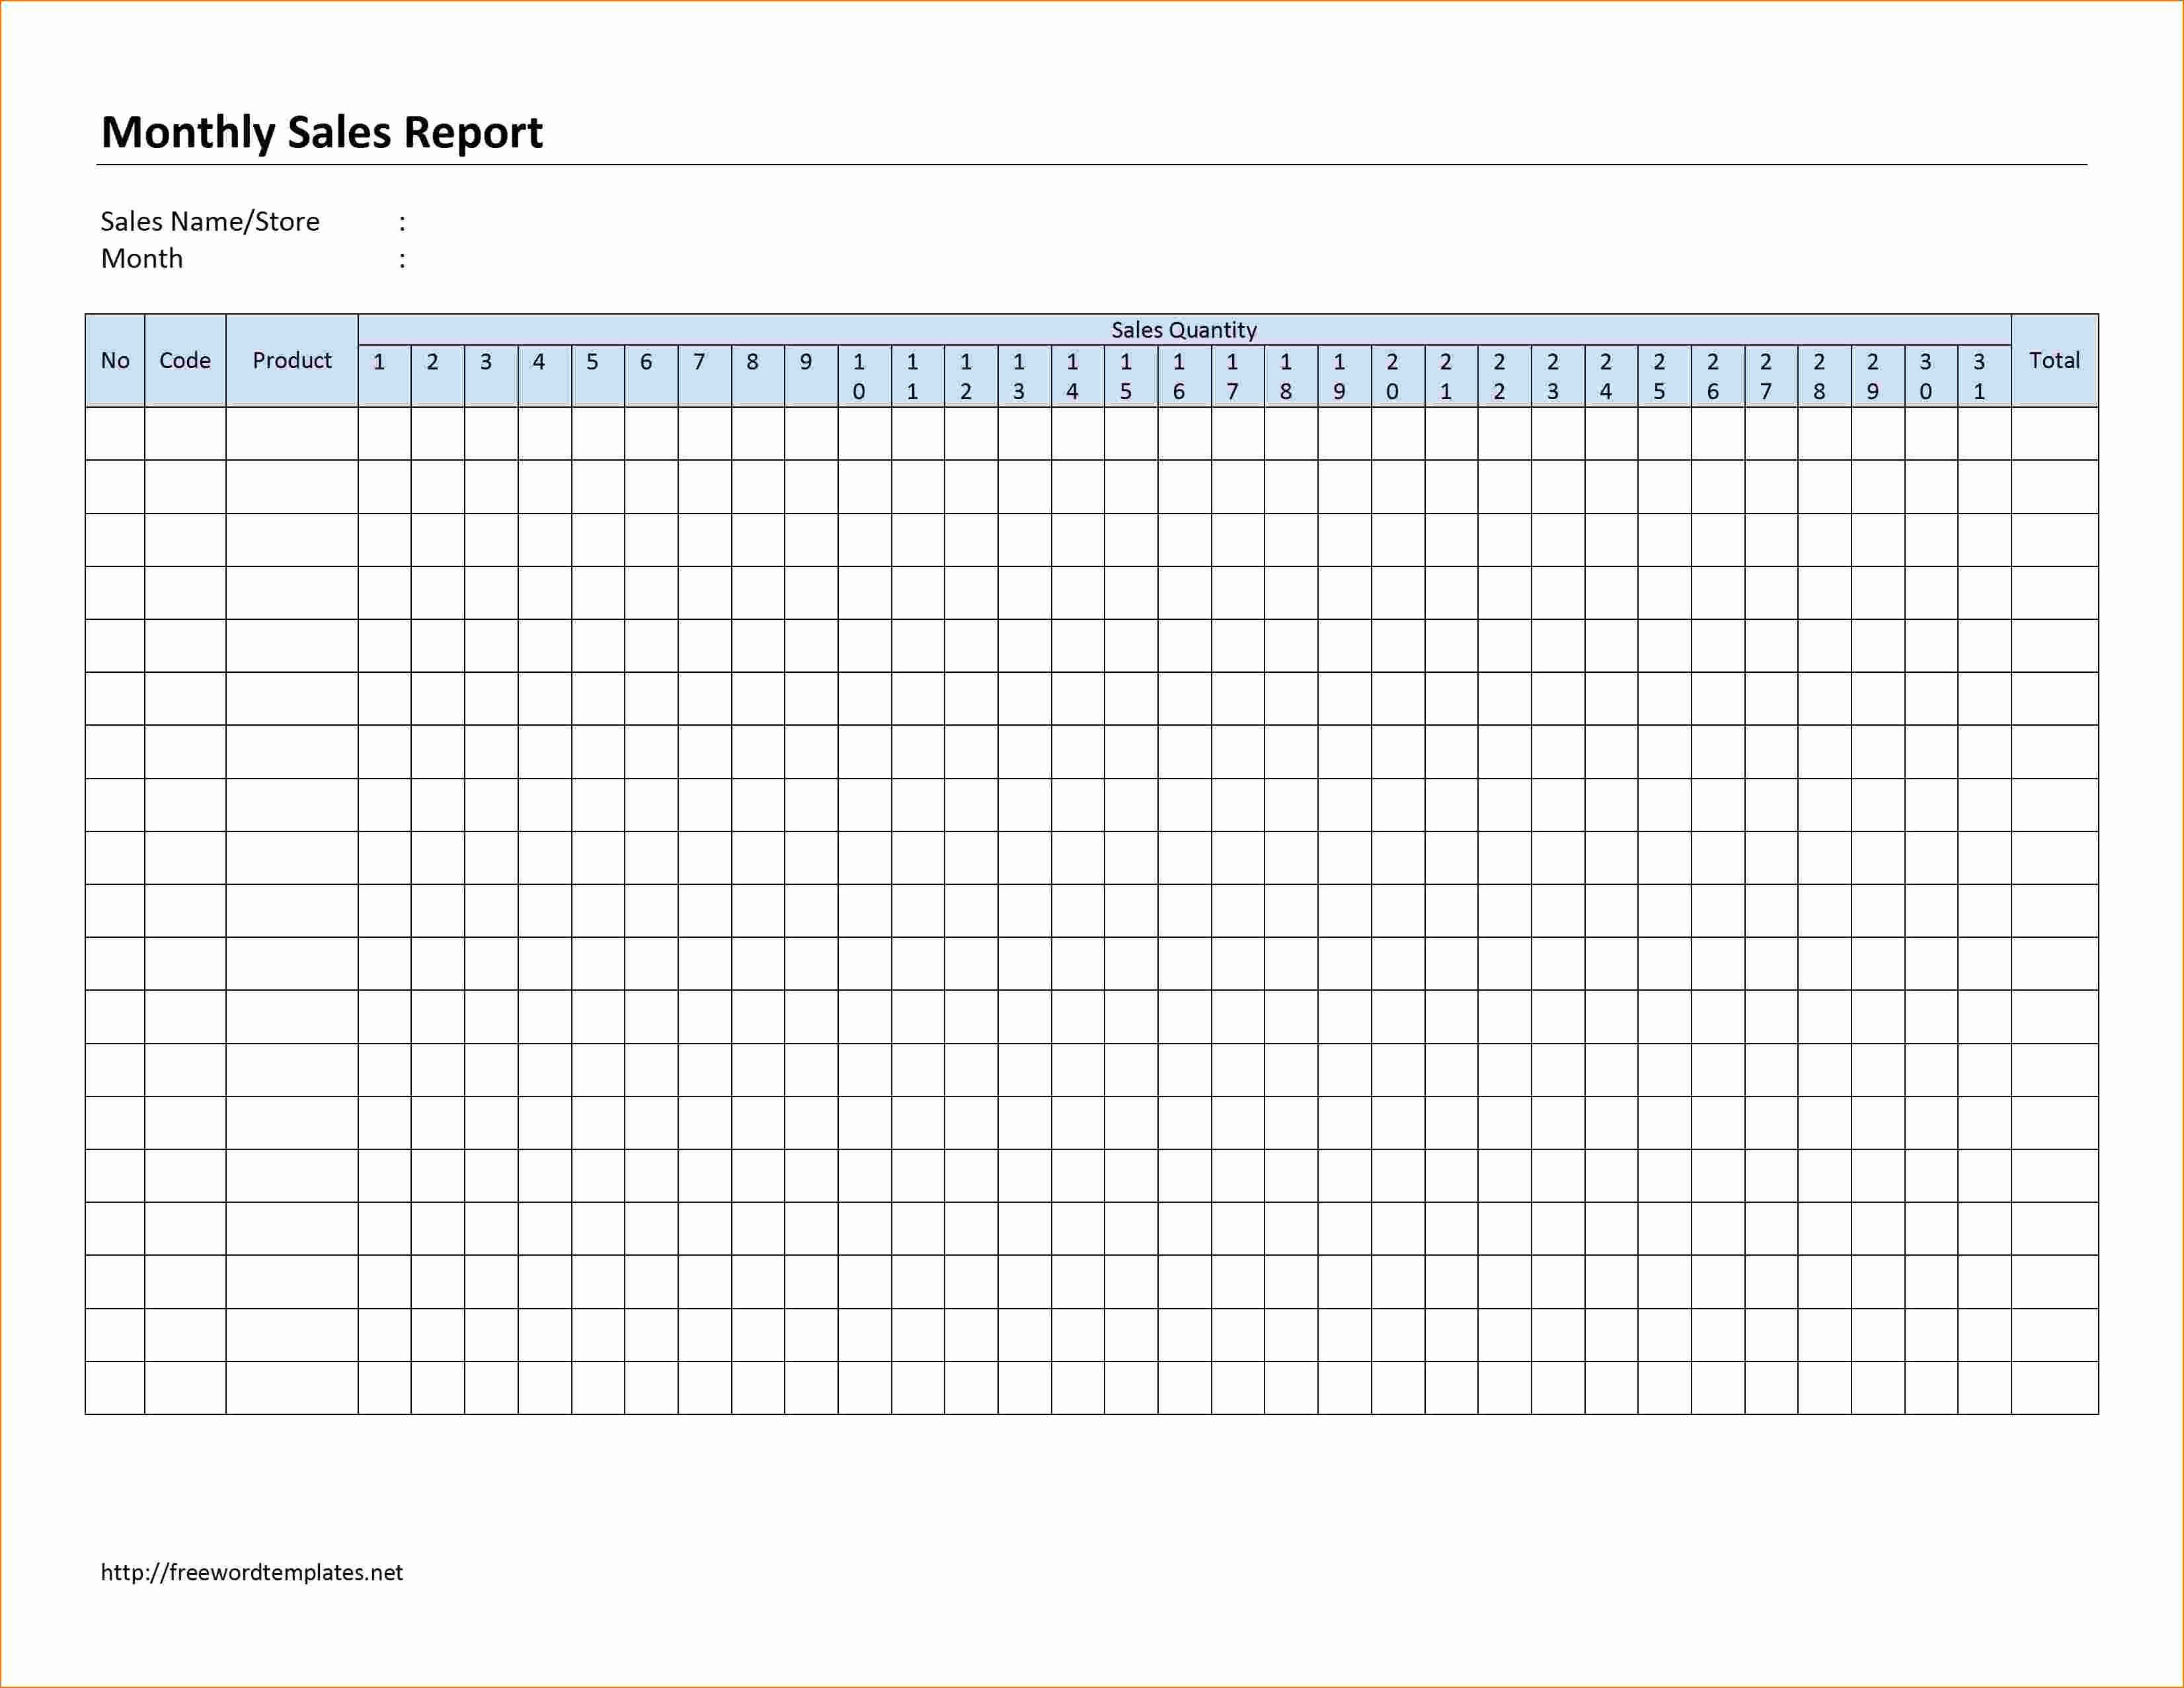 Monthly Sales Report Template New 6 Sales Report Template